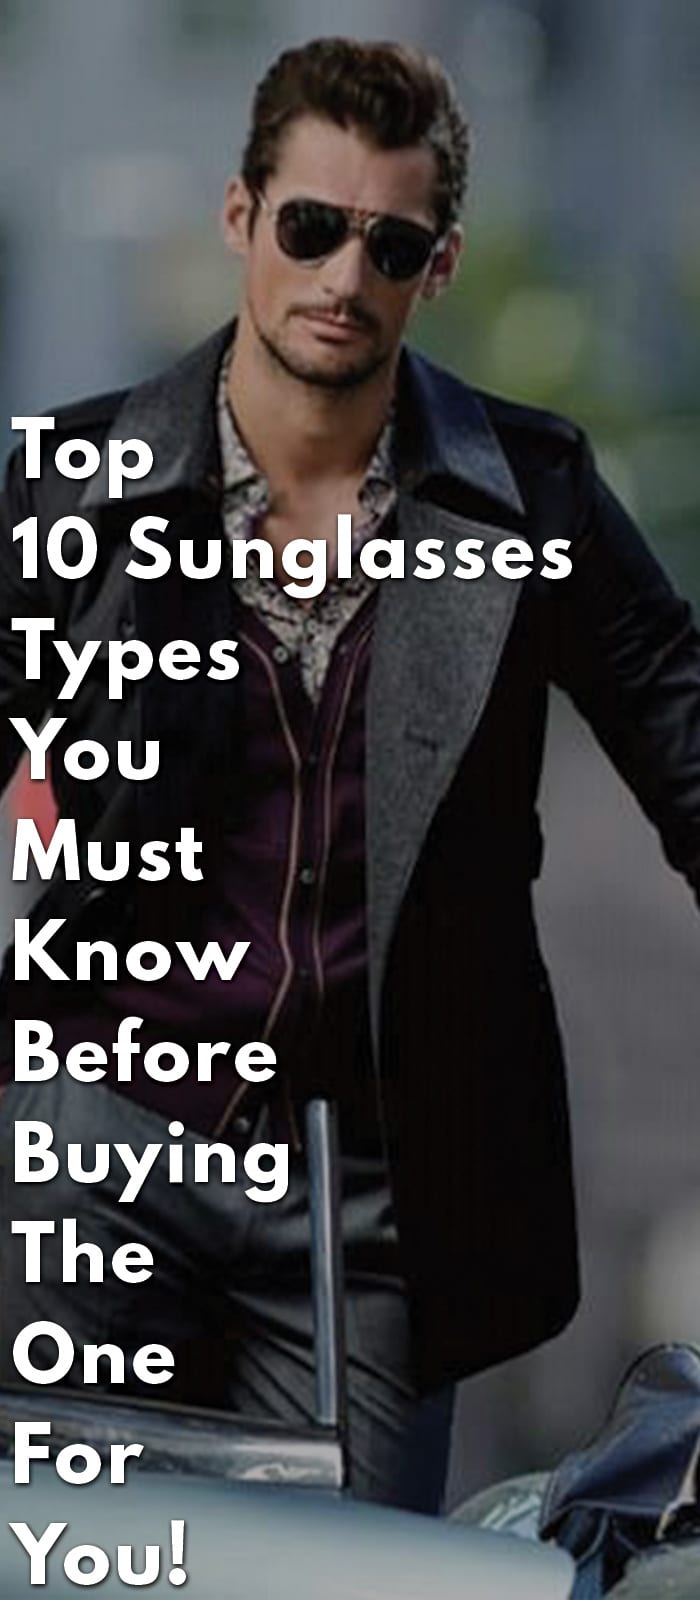 Top-10-Sunglasses-Types-You-Must-Know-Before-Buying-The-One-For-You!